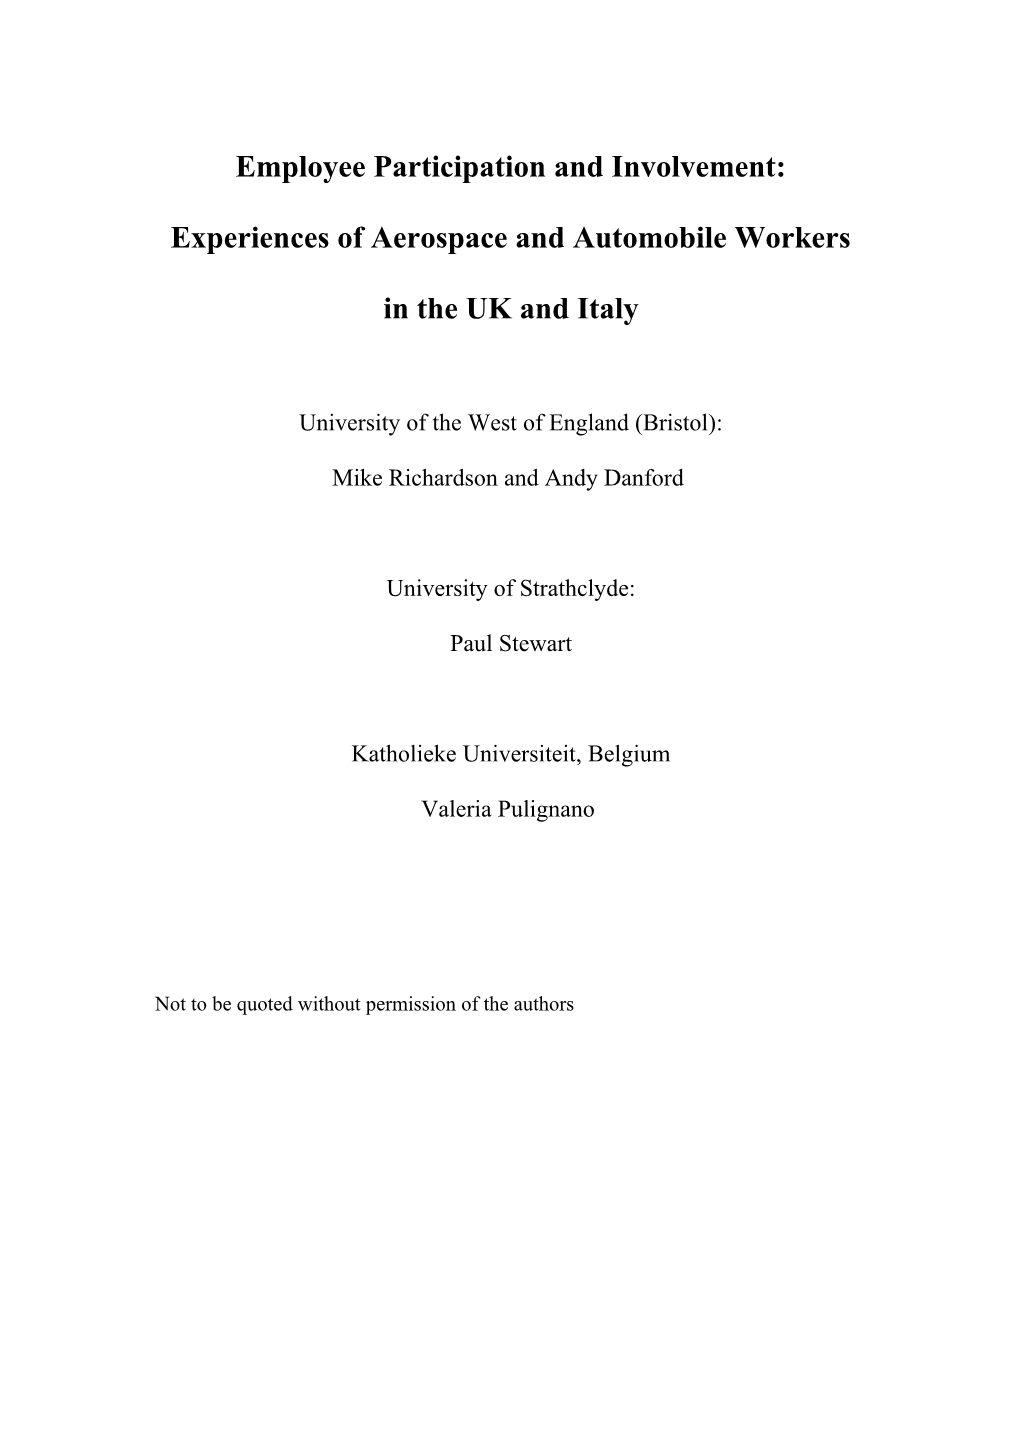 Employee Participation and Involvement: Experiences of Aerospace and Automobile Workers